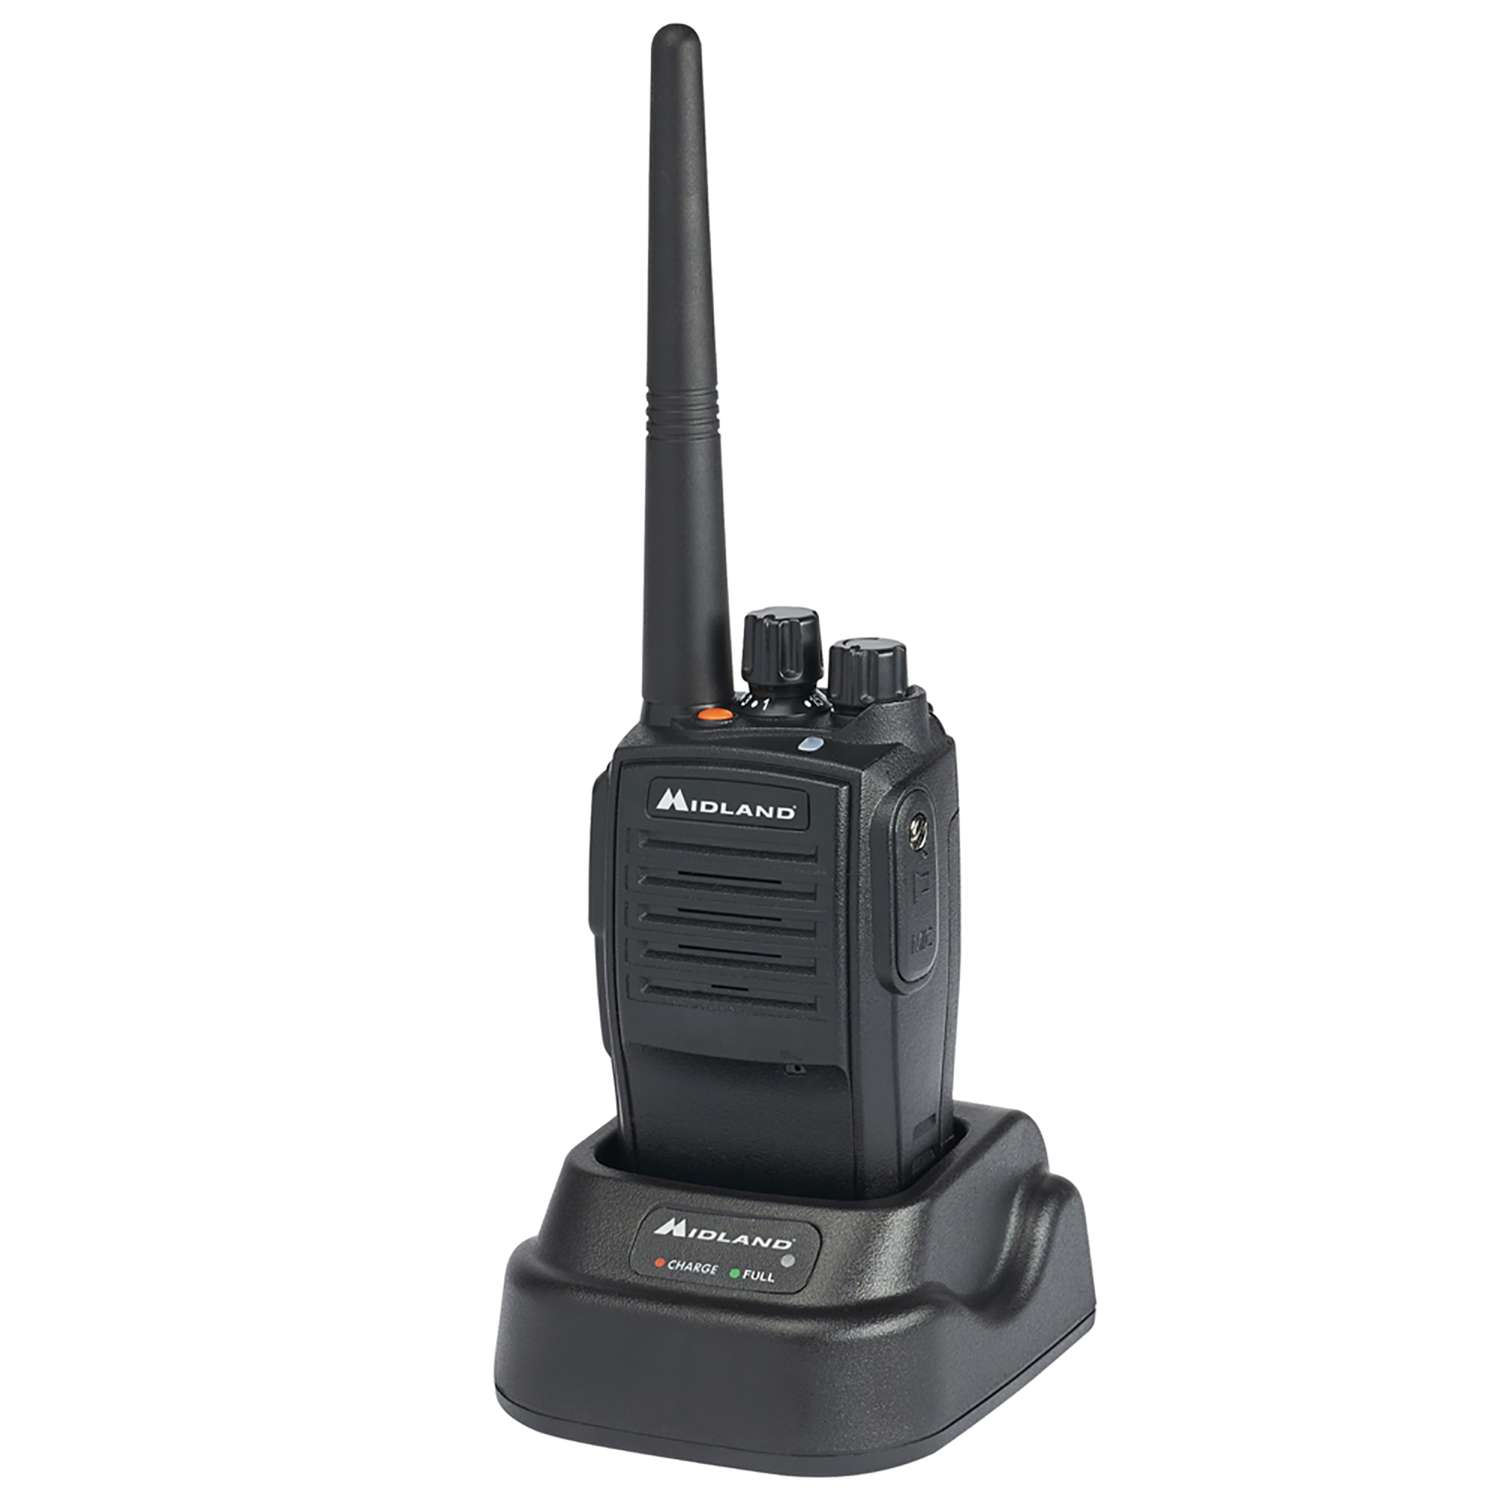 Midland MB400 Business Two-Way Radio Easy to Program Long-Range 16 Channels Coverage for up to a 350,000 Square Foot Warehouse Construction Ho - 2